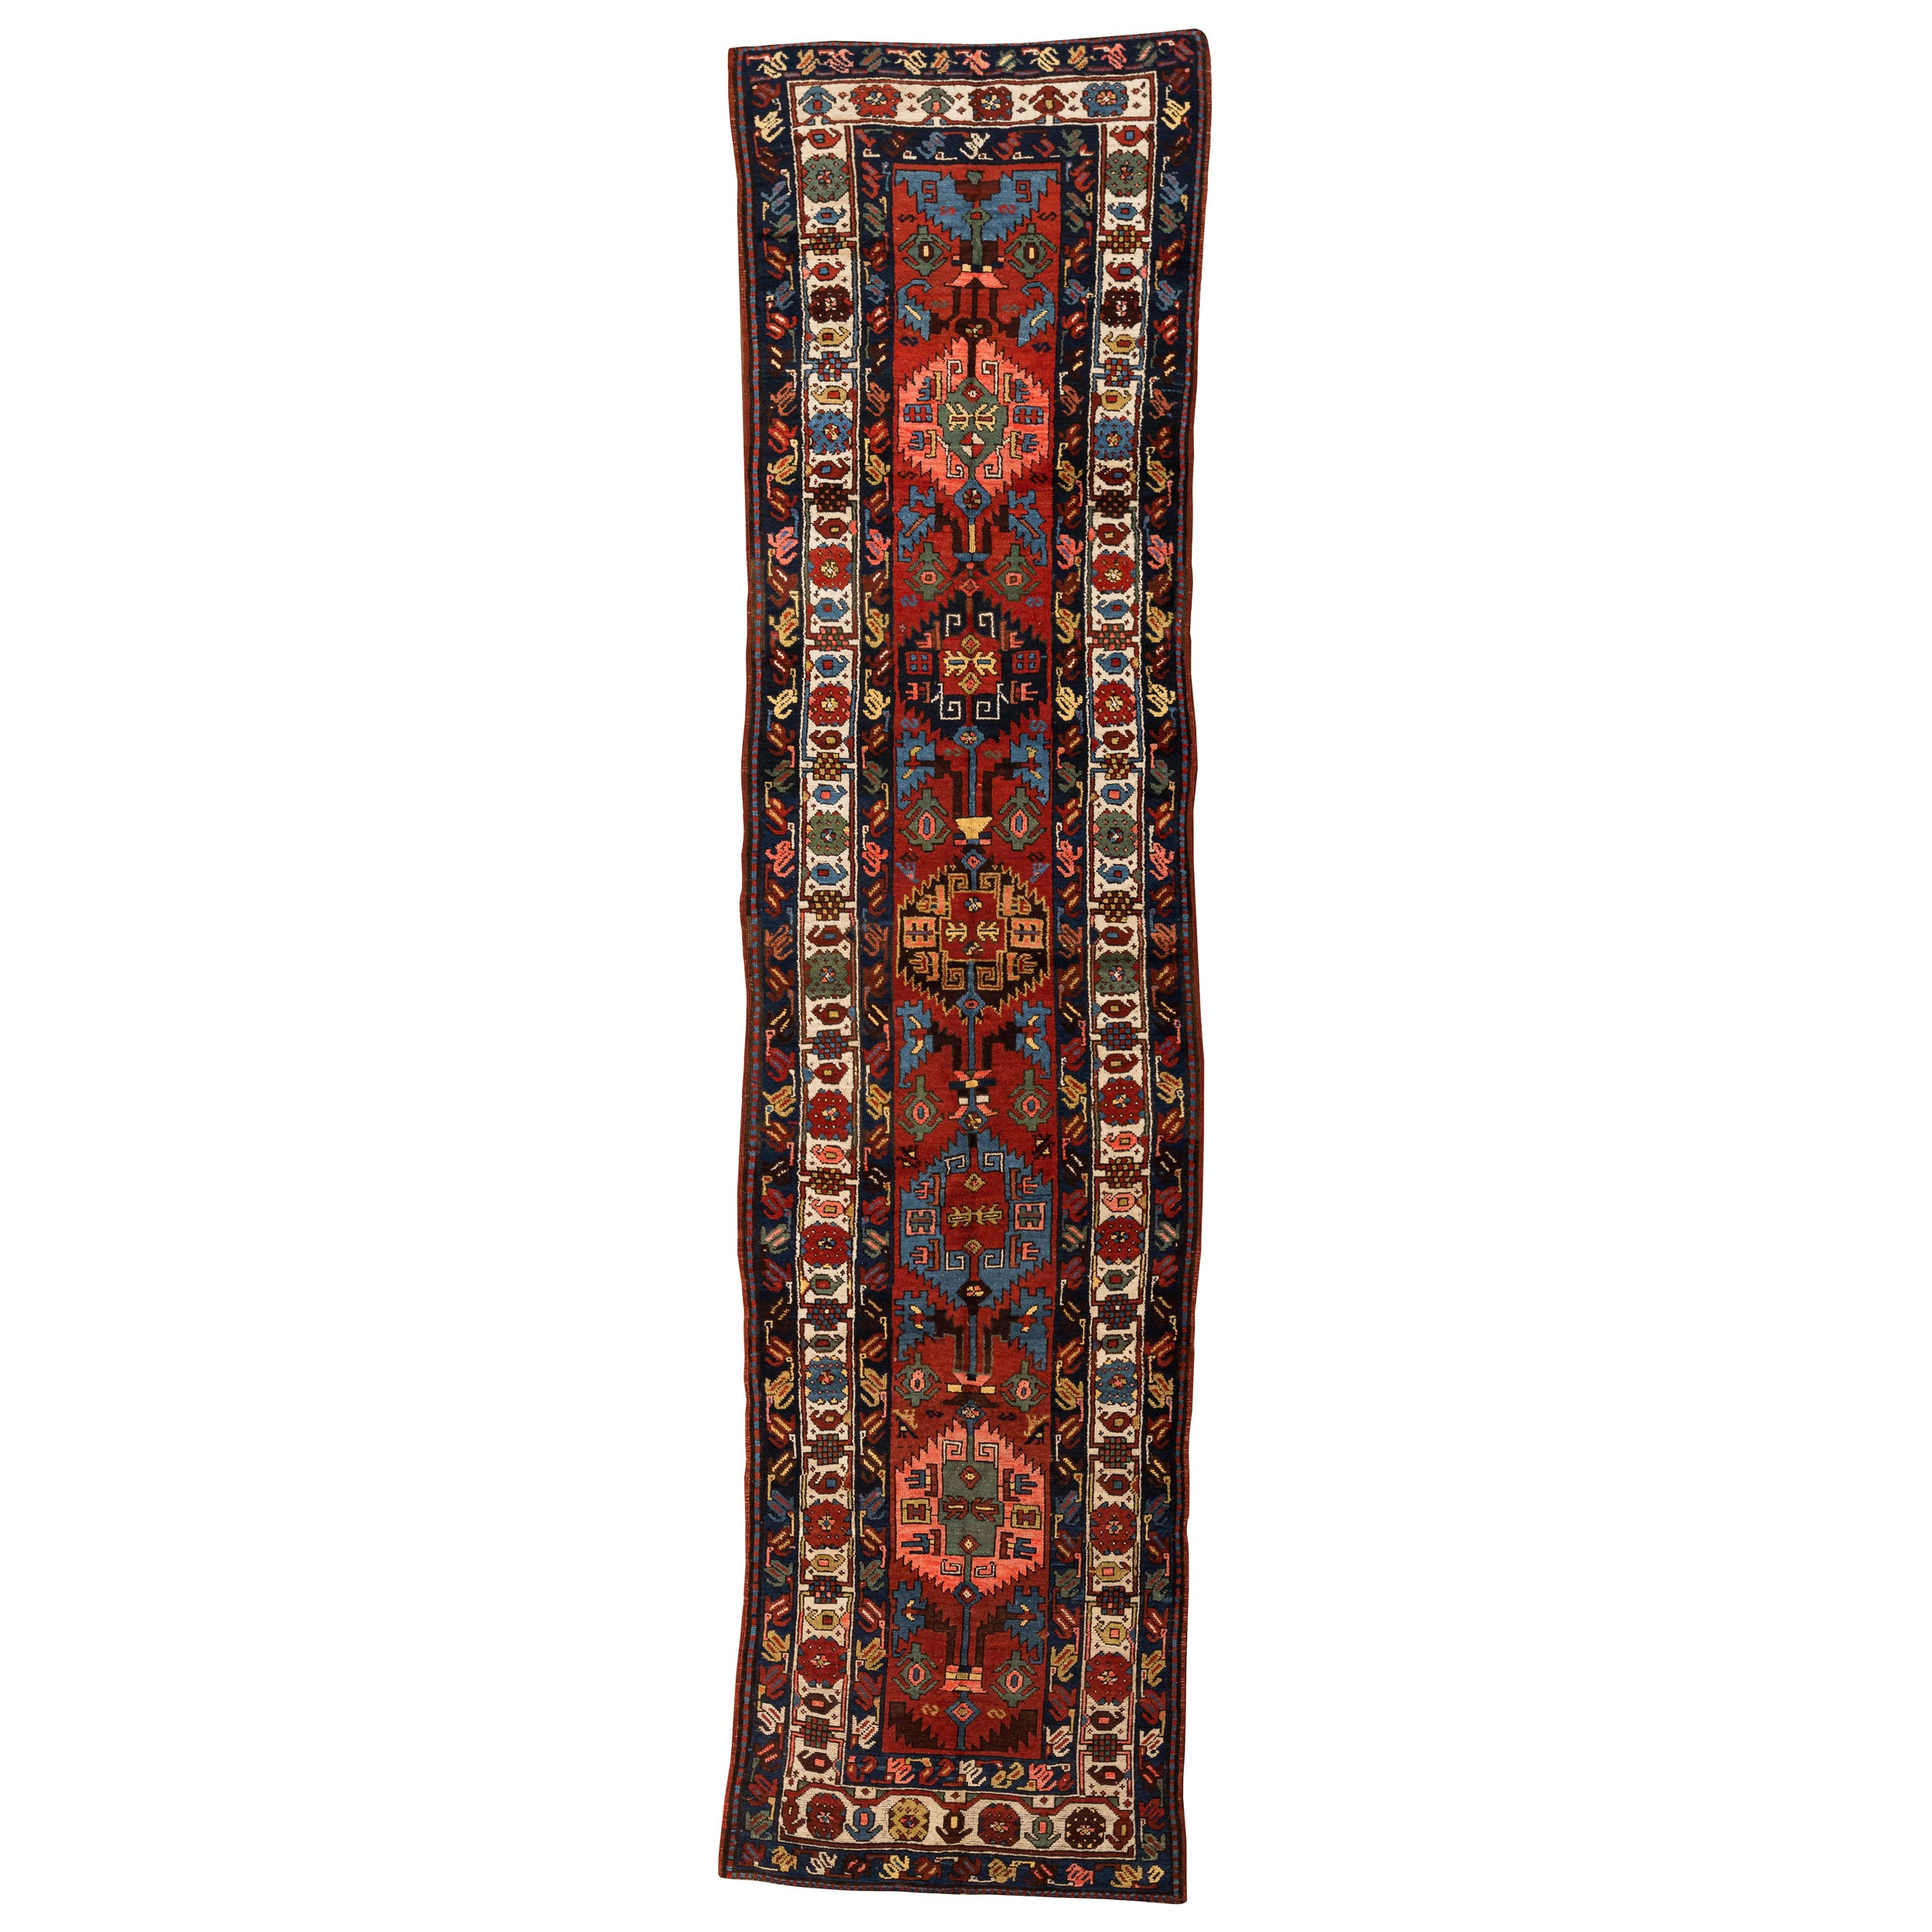 Kazak - Northwest Persia
This is an antique Kazak runner with vibrant colours and bold design. The red field features five complete, serrated medallions interconnected by rose buttons and rectilinear floral branches. Geometric figures, including